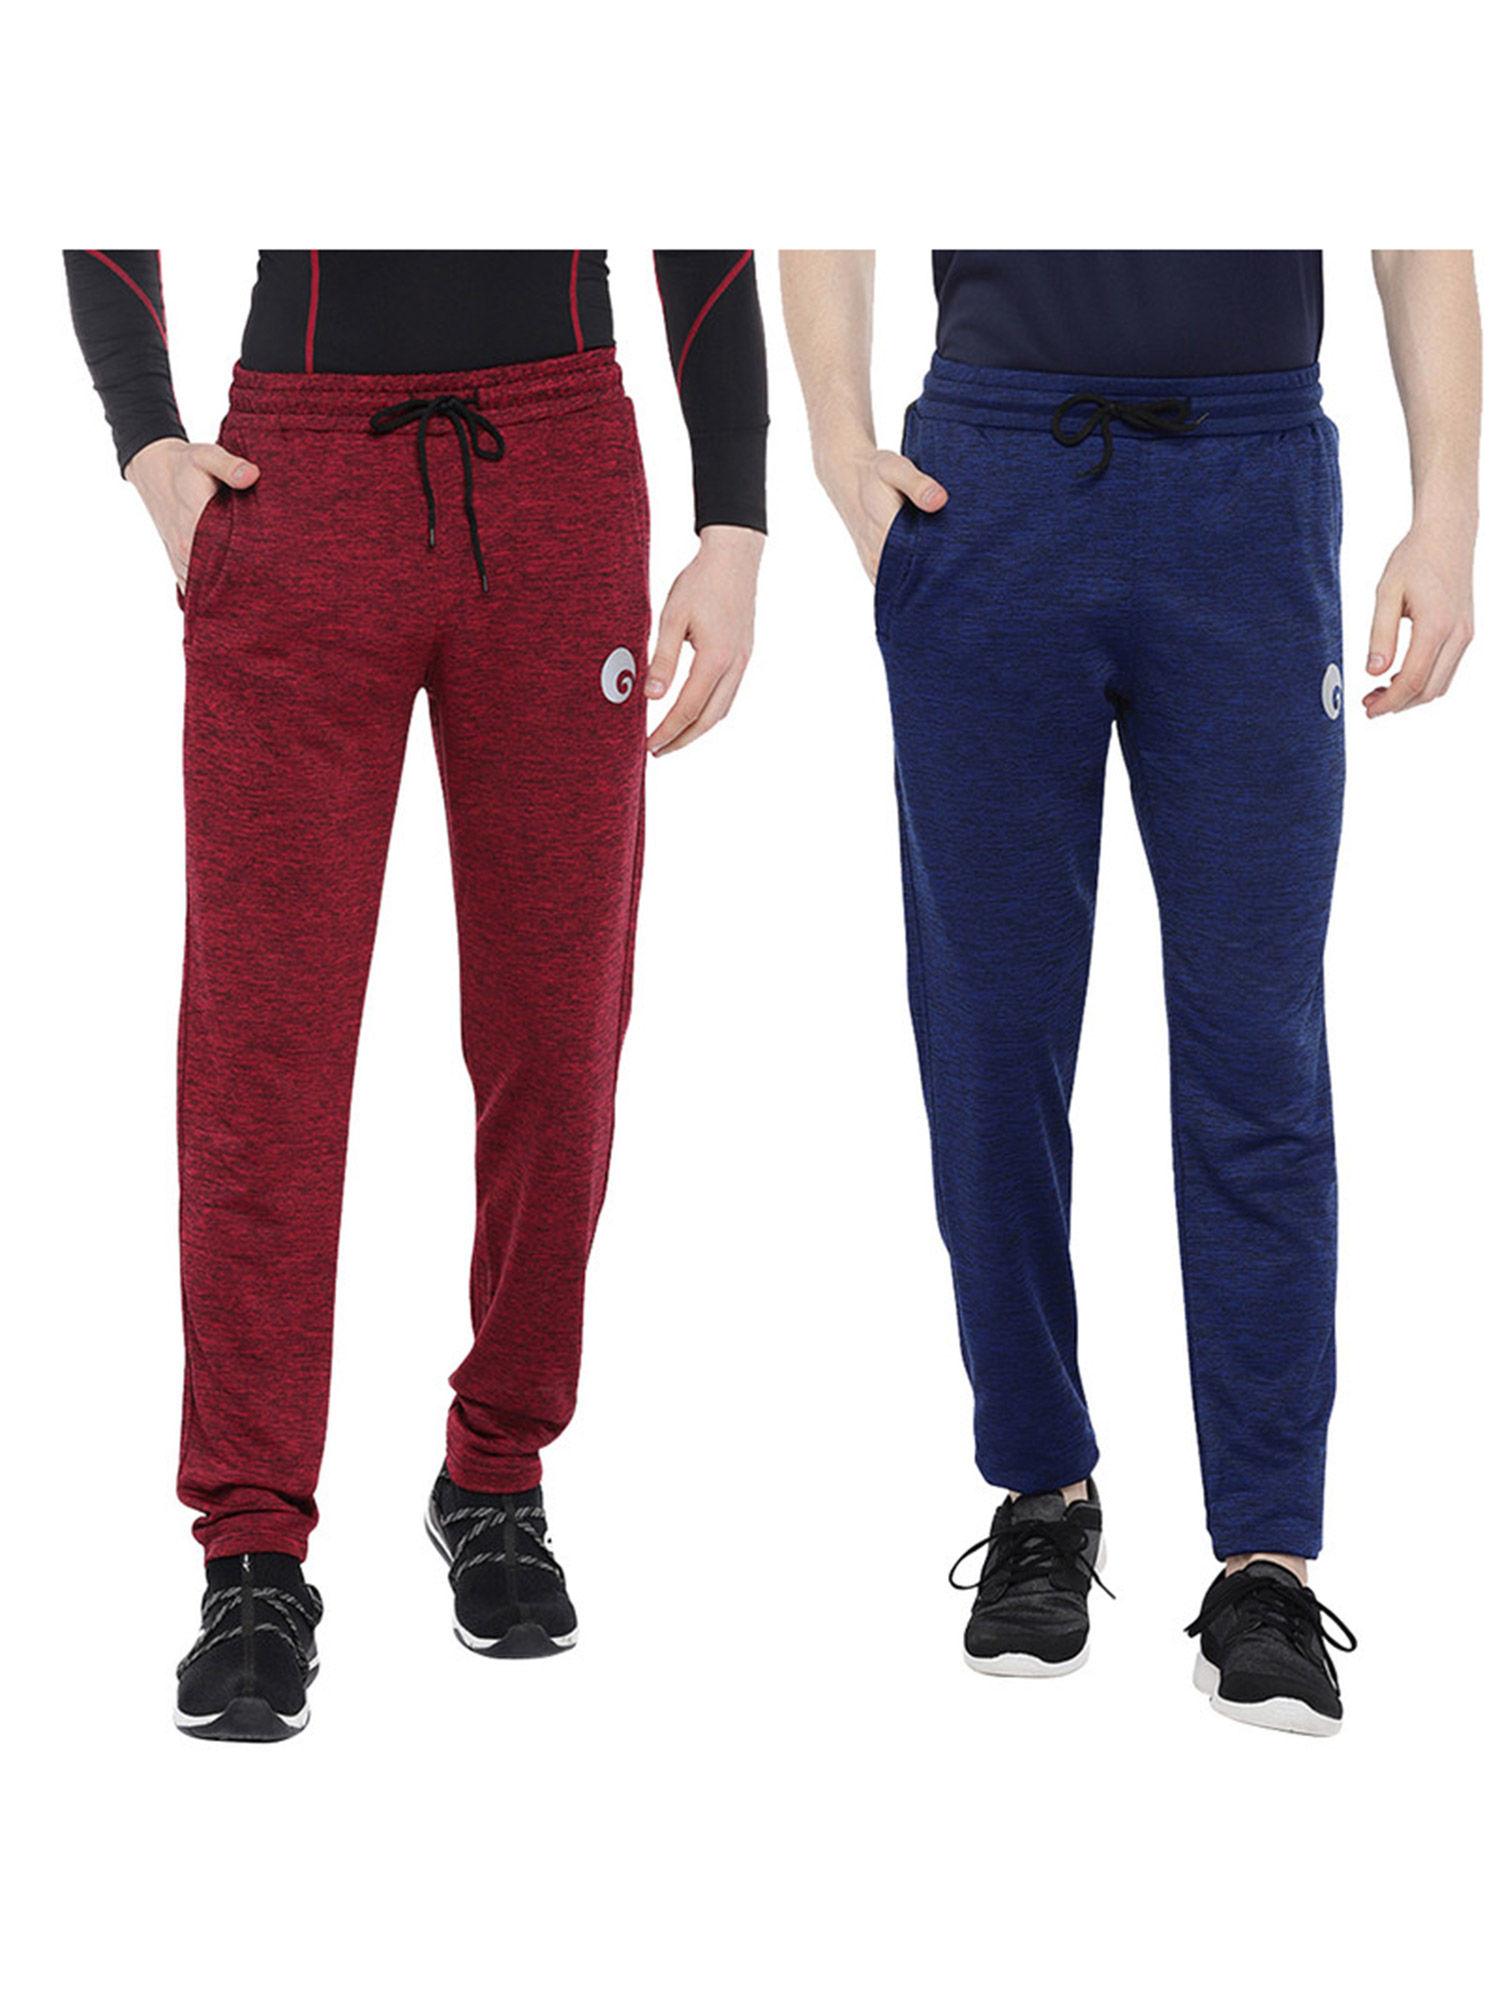 Sport,Gym & Workout Track Pant 12 for Mens Red-Blue (Pack of 2)